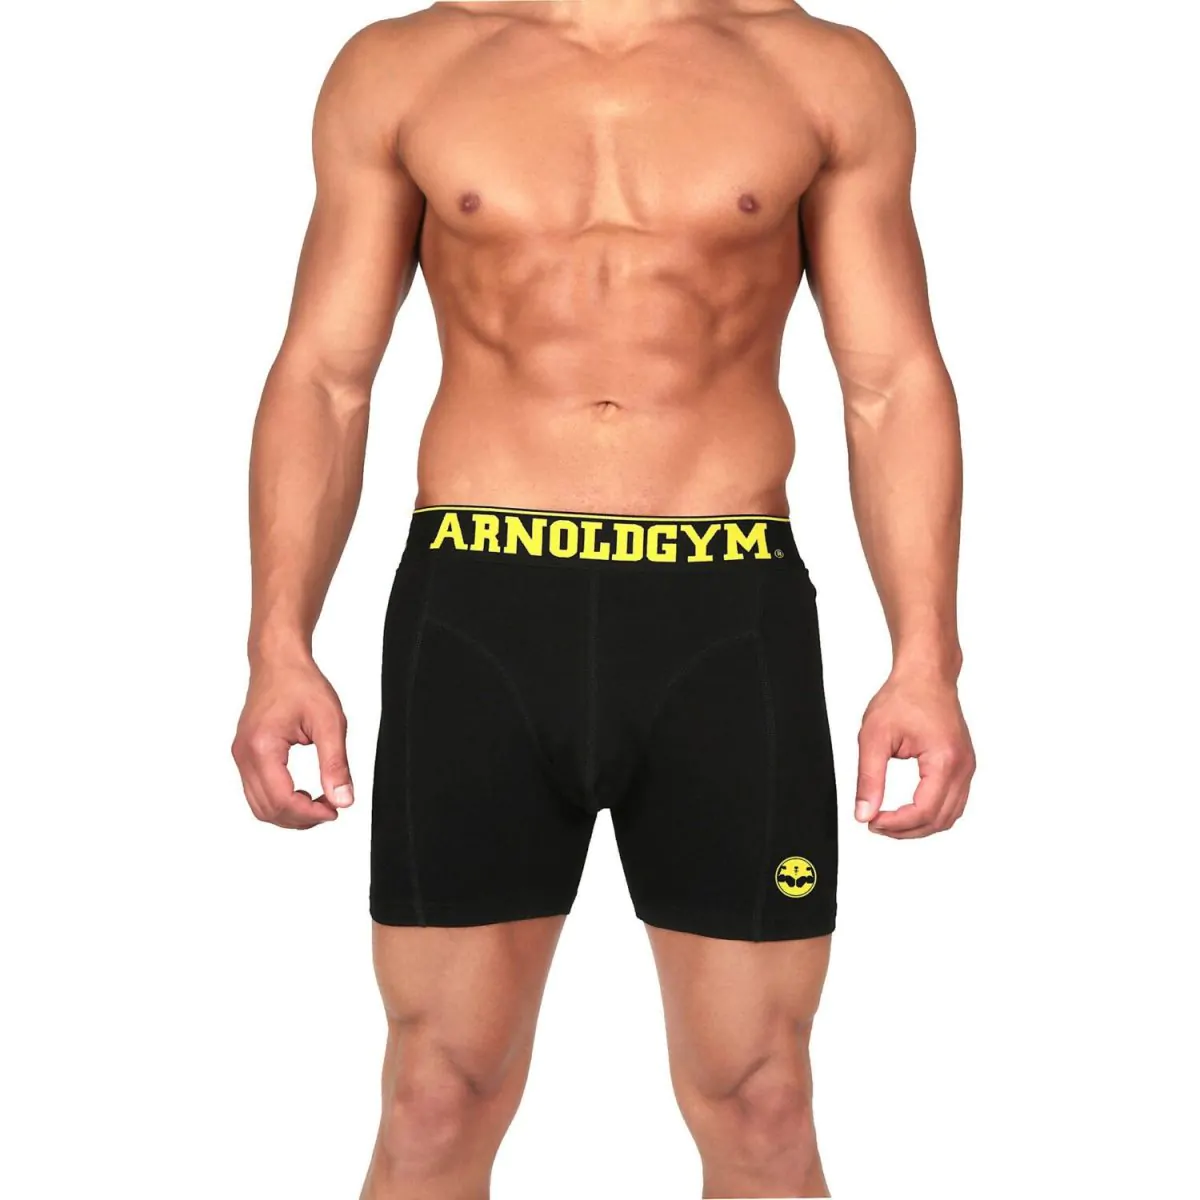 0000446 arnold gym olympic series black boxers 2 pack